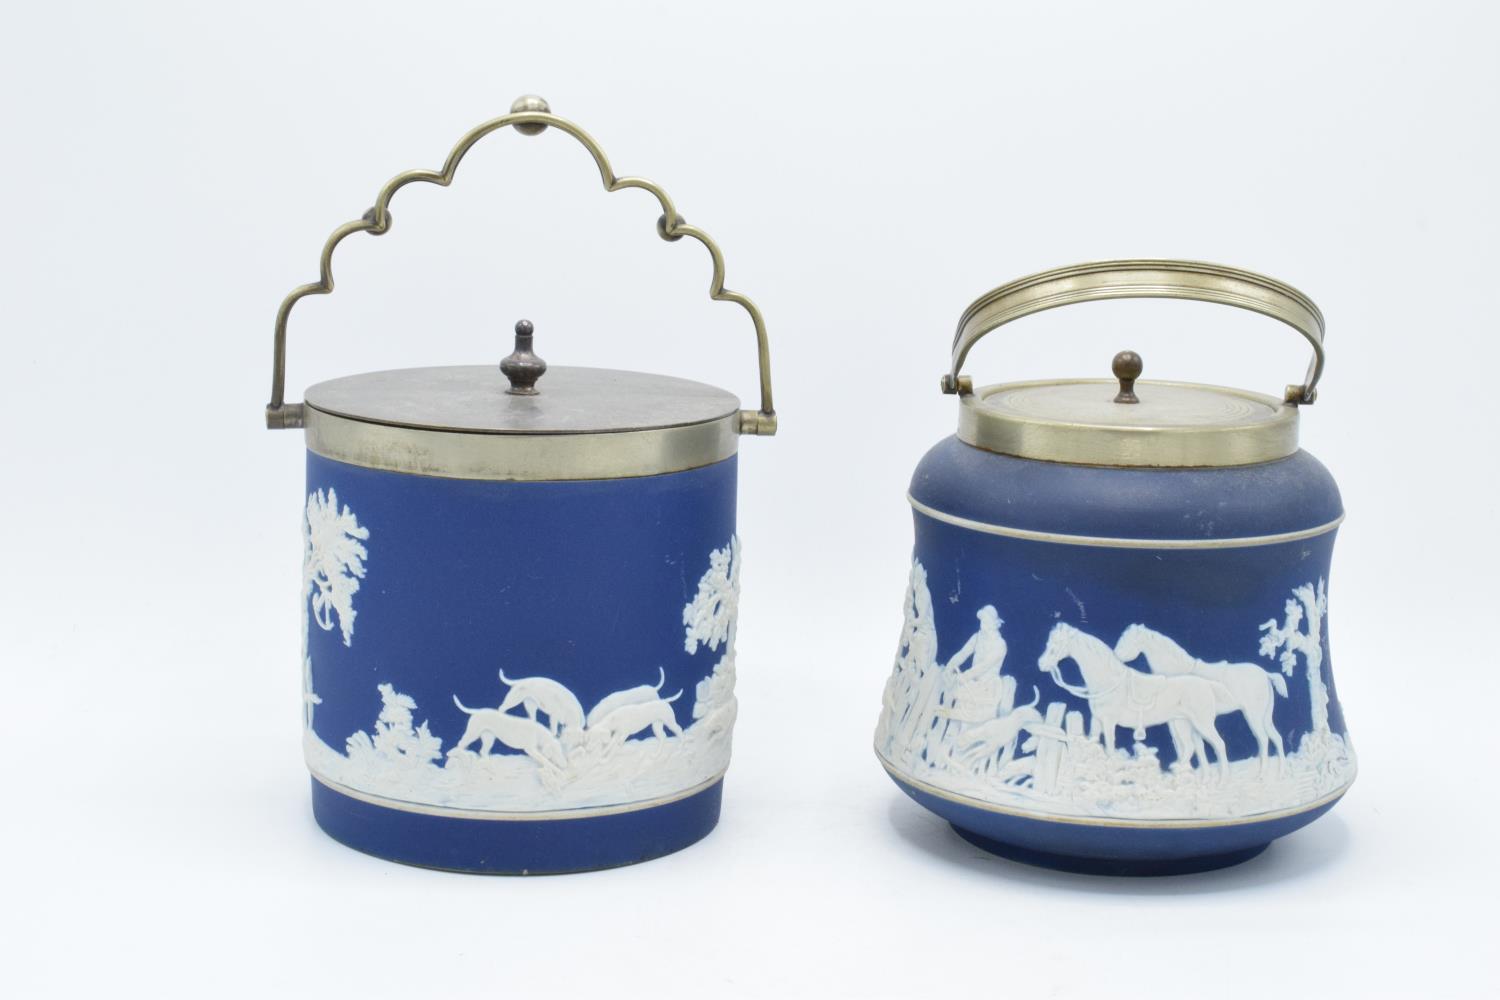 Adams of Tunstall dark blue jasperware biscuit barrels both with silver plate rims and lids (2). - Image 2 of 3